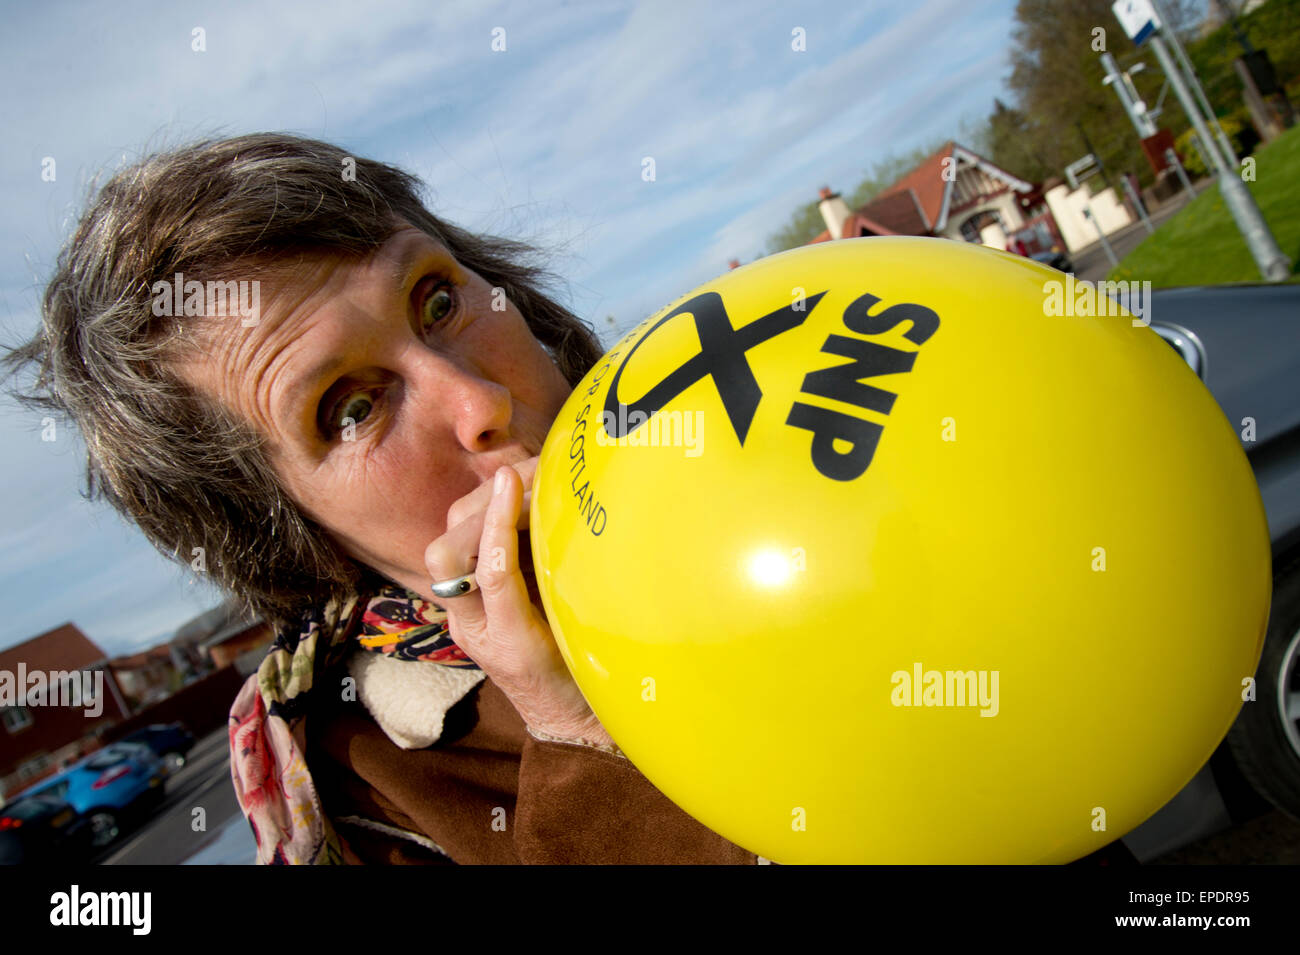 A supporter of the SNP (Scottish National Party) blowing up a balloon before taking part in an eve of election cavalcade. Stock Photo